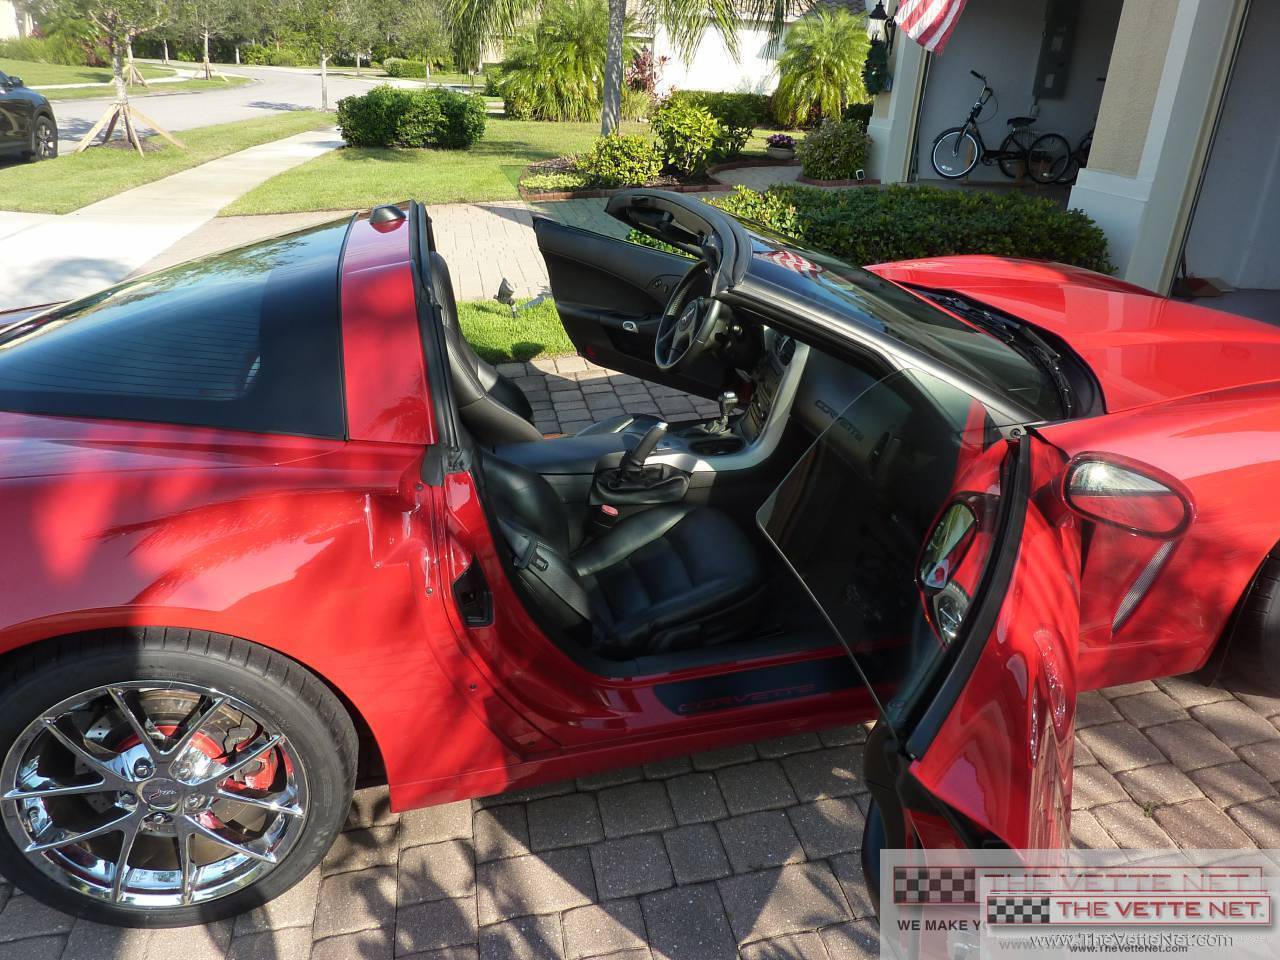 2005 Corvette Coupe Victory Red